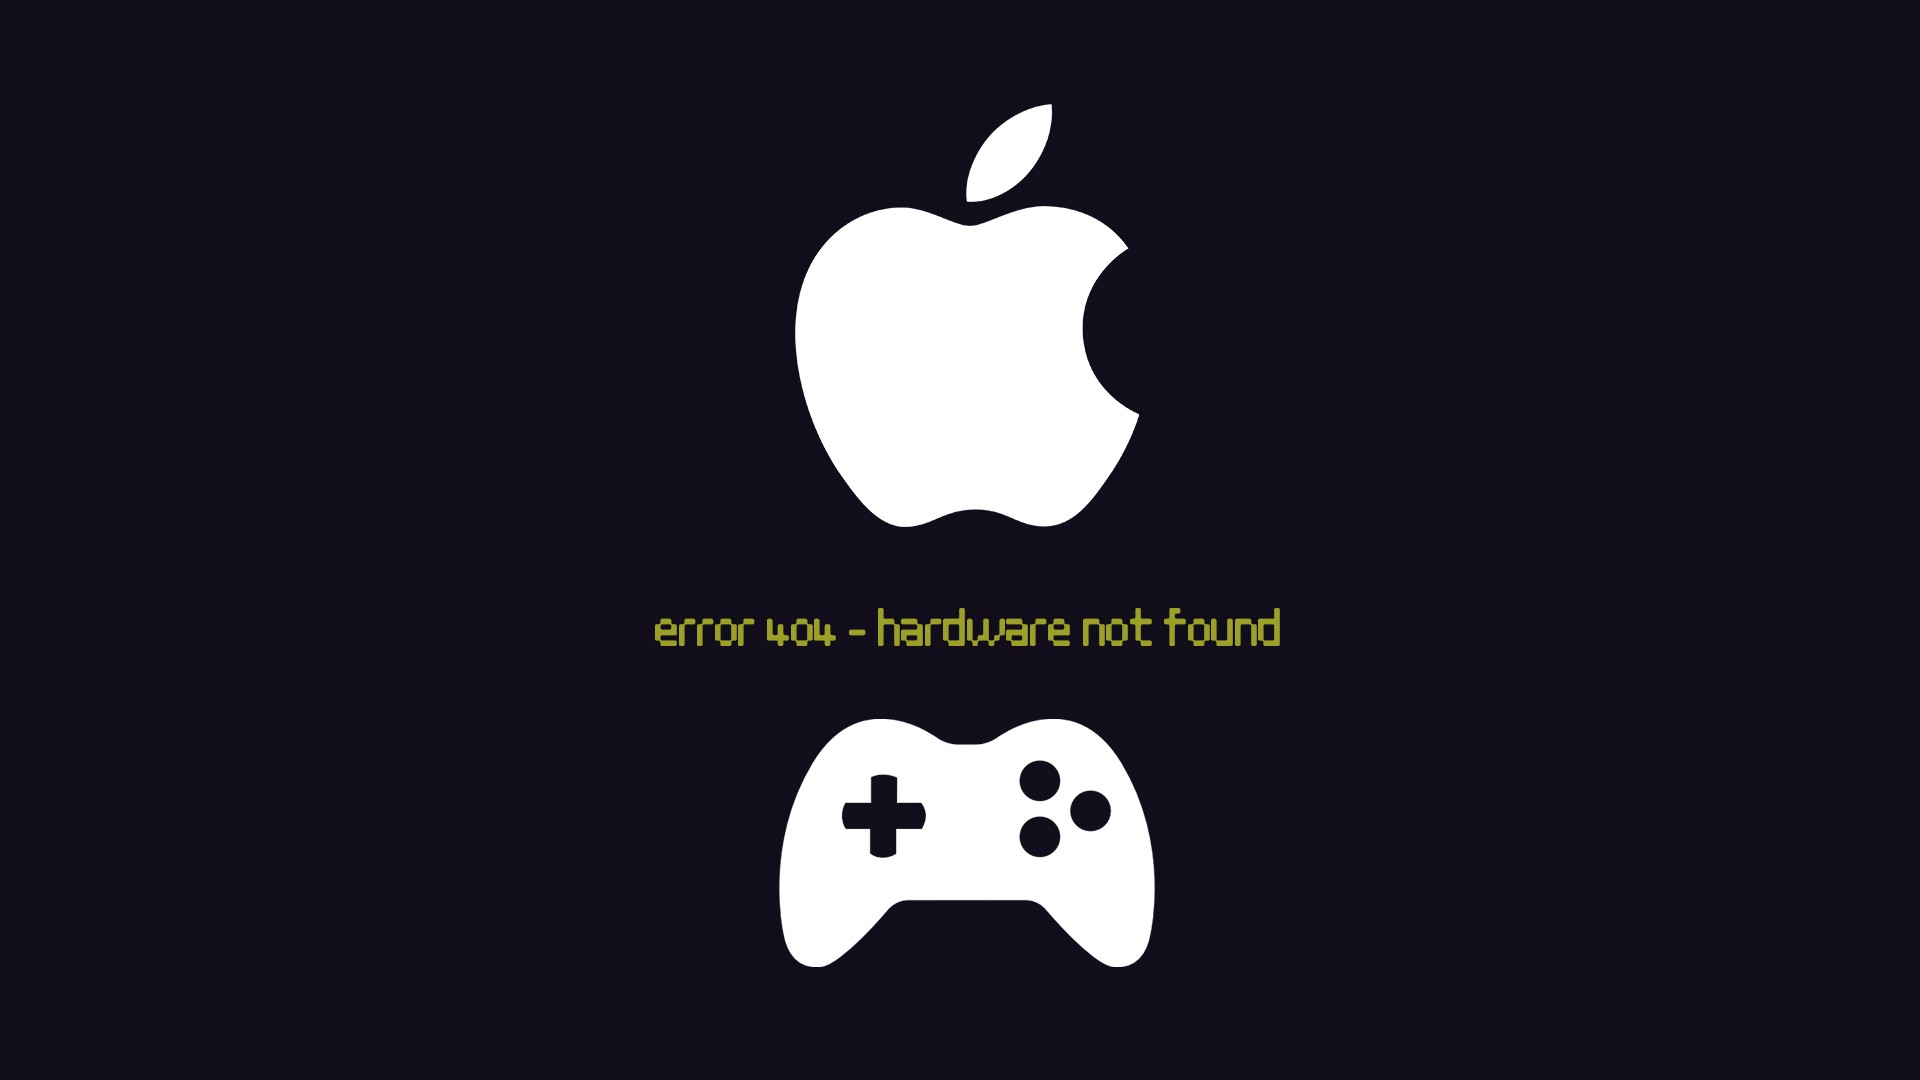 General 1920x1080 MacBook iMac hardware Apple Inc. video games PC gaming simple background controllers minimalism typography